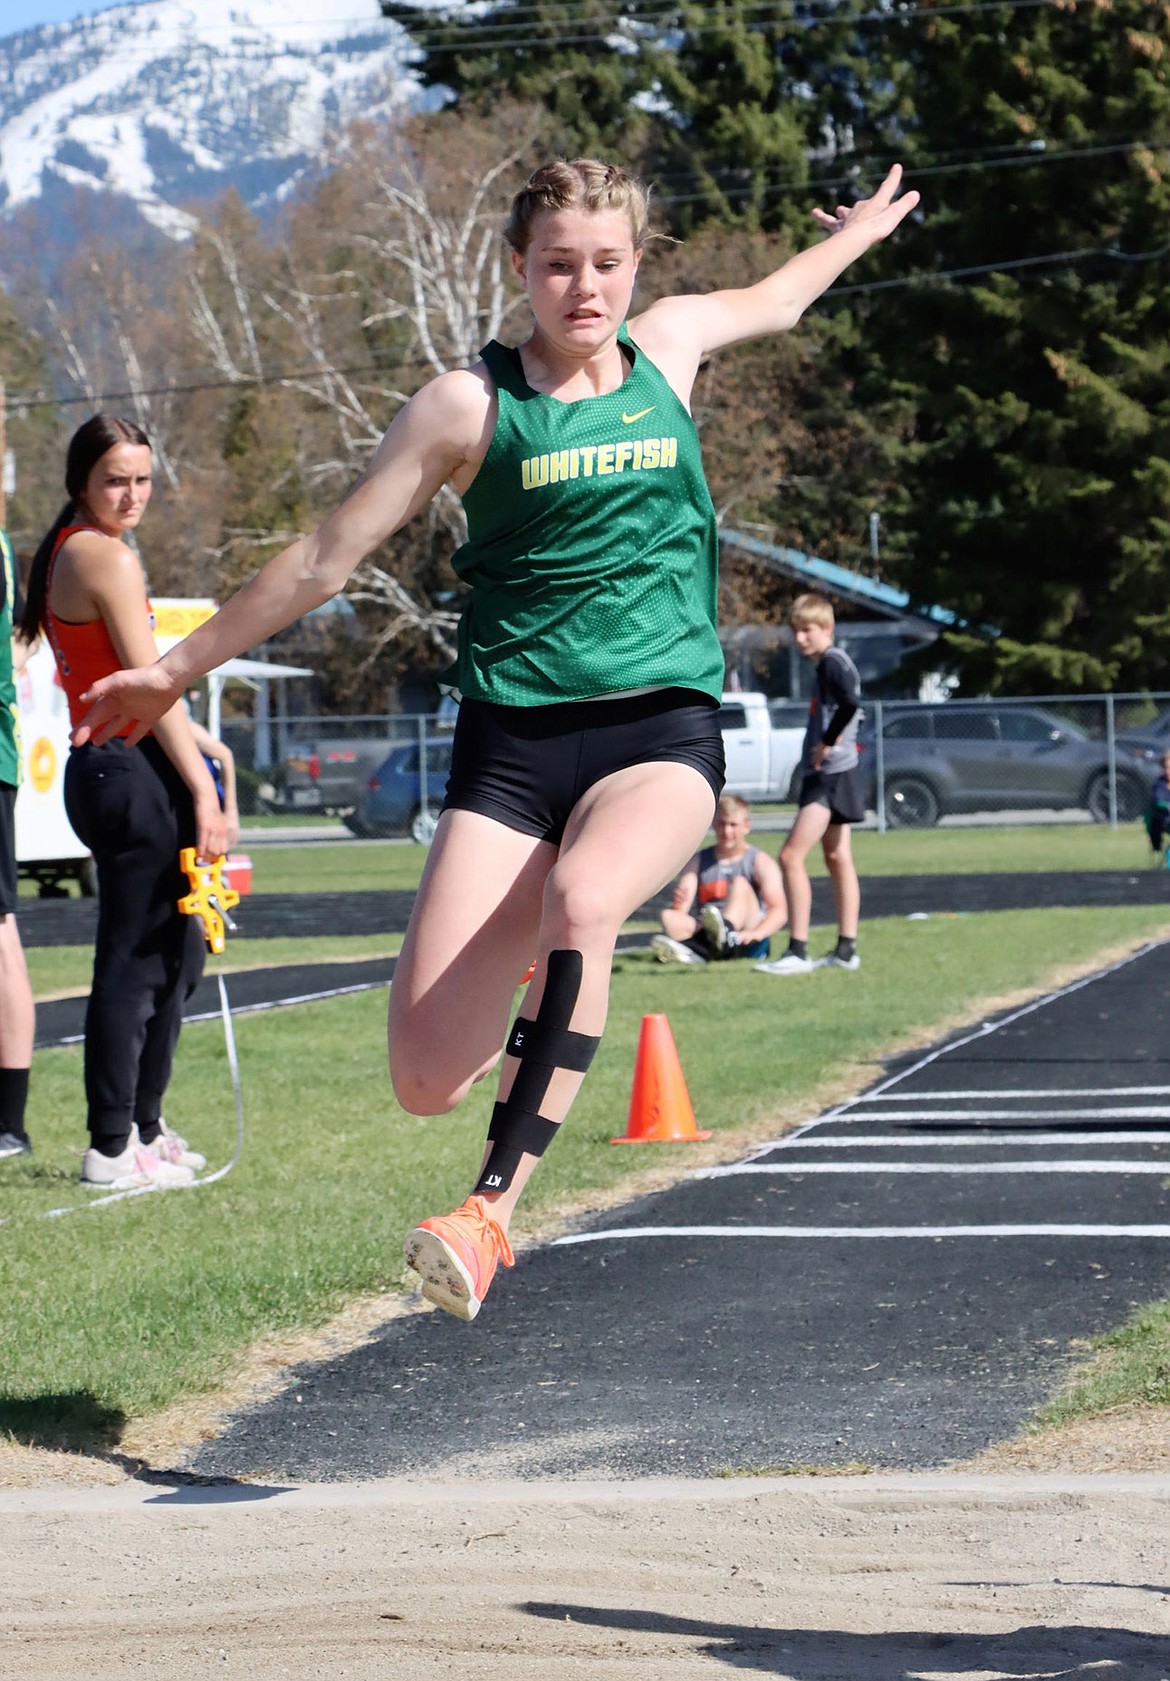 Bulldog Bailey Smith competes in the long jump at Whitefish High School. (Greg Nelson photo)